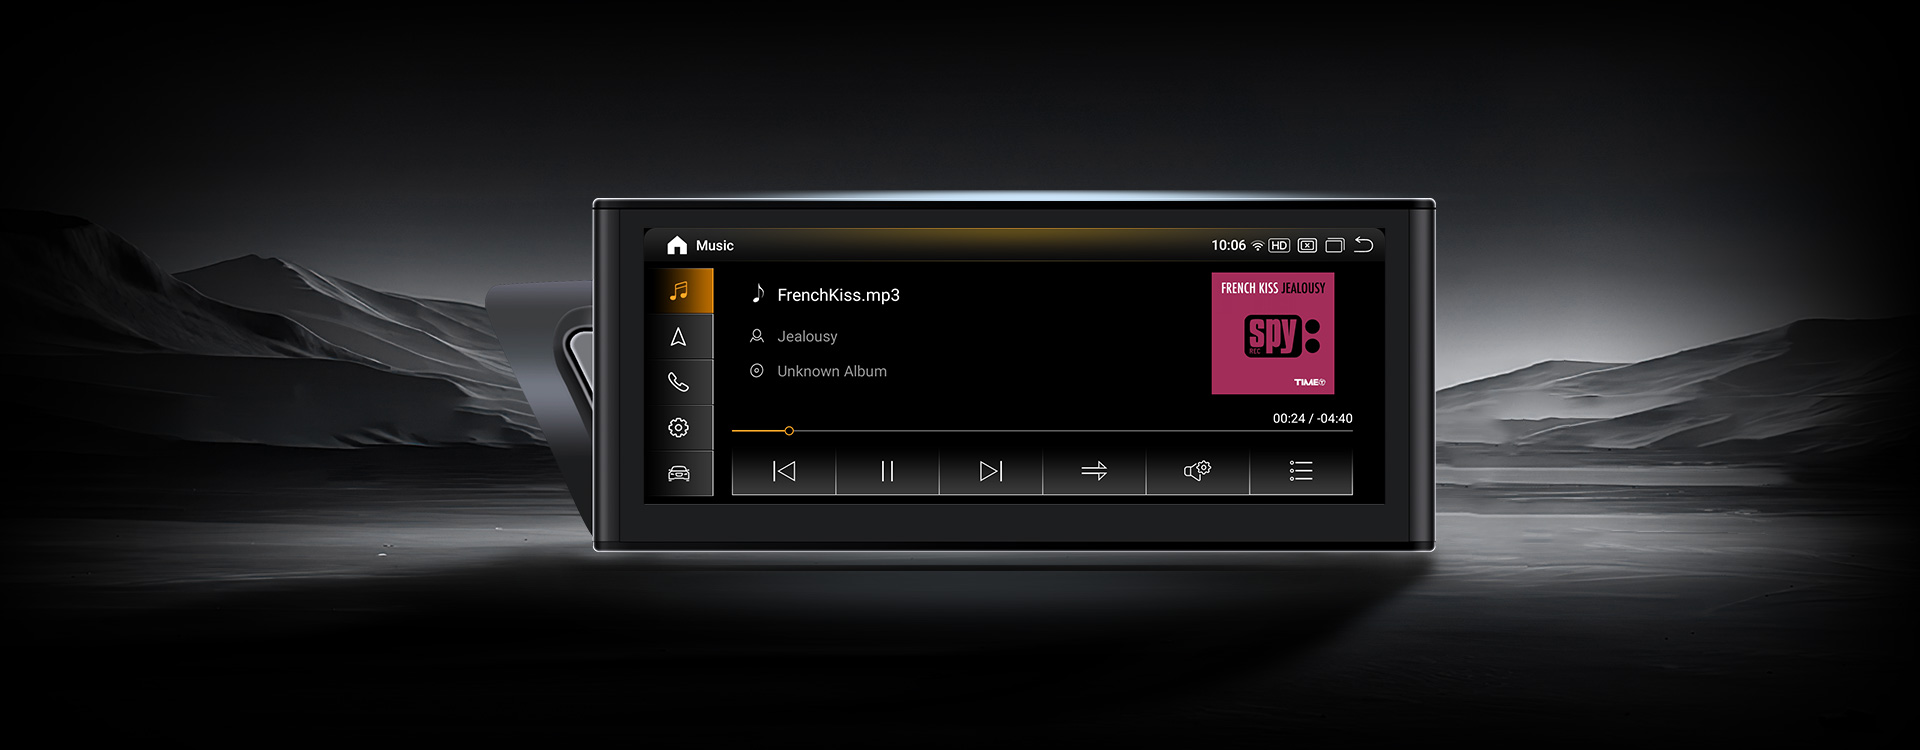 Abdroid-for-audi-10.25-12.3inch-banner2